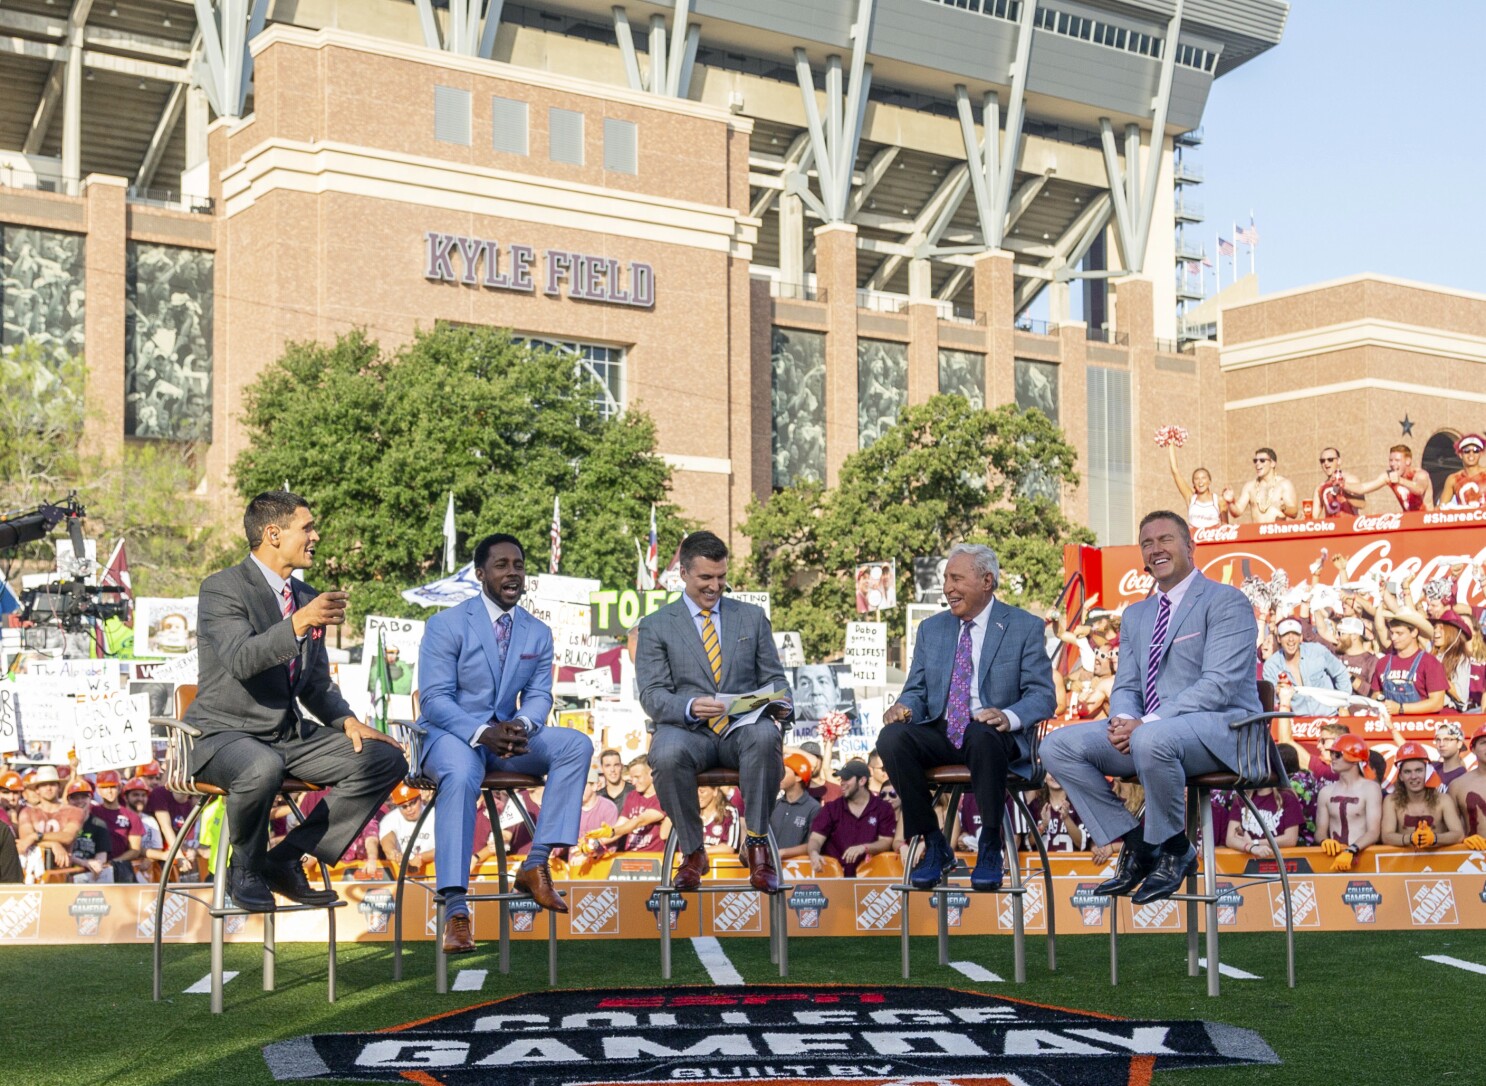 ESPN's 'College GameDay' is facing changes and increased